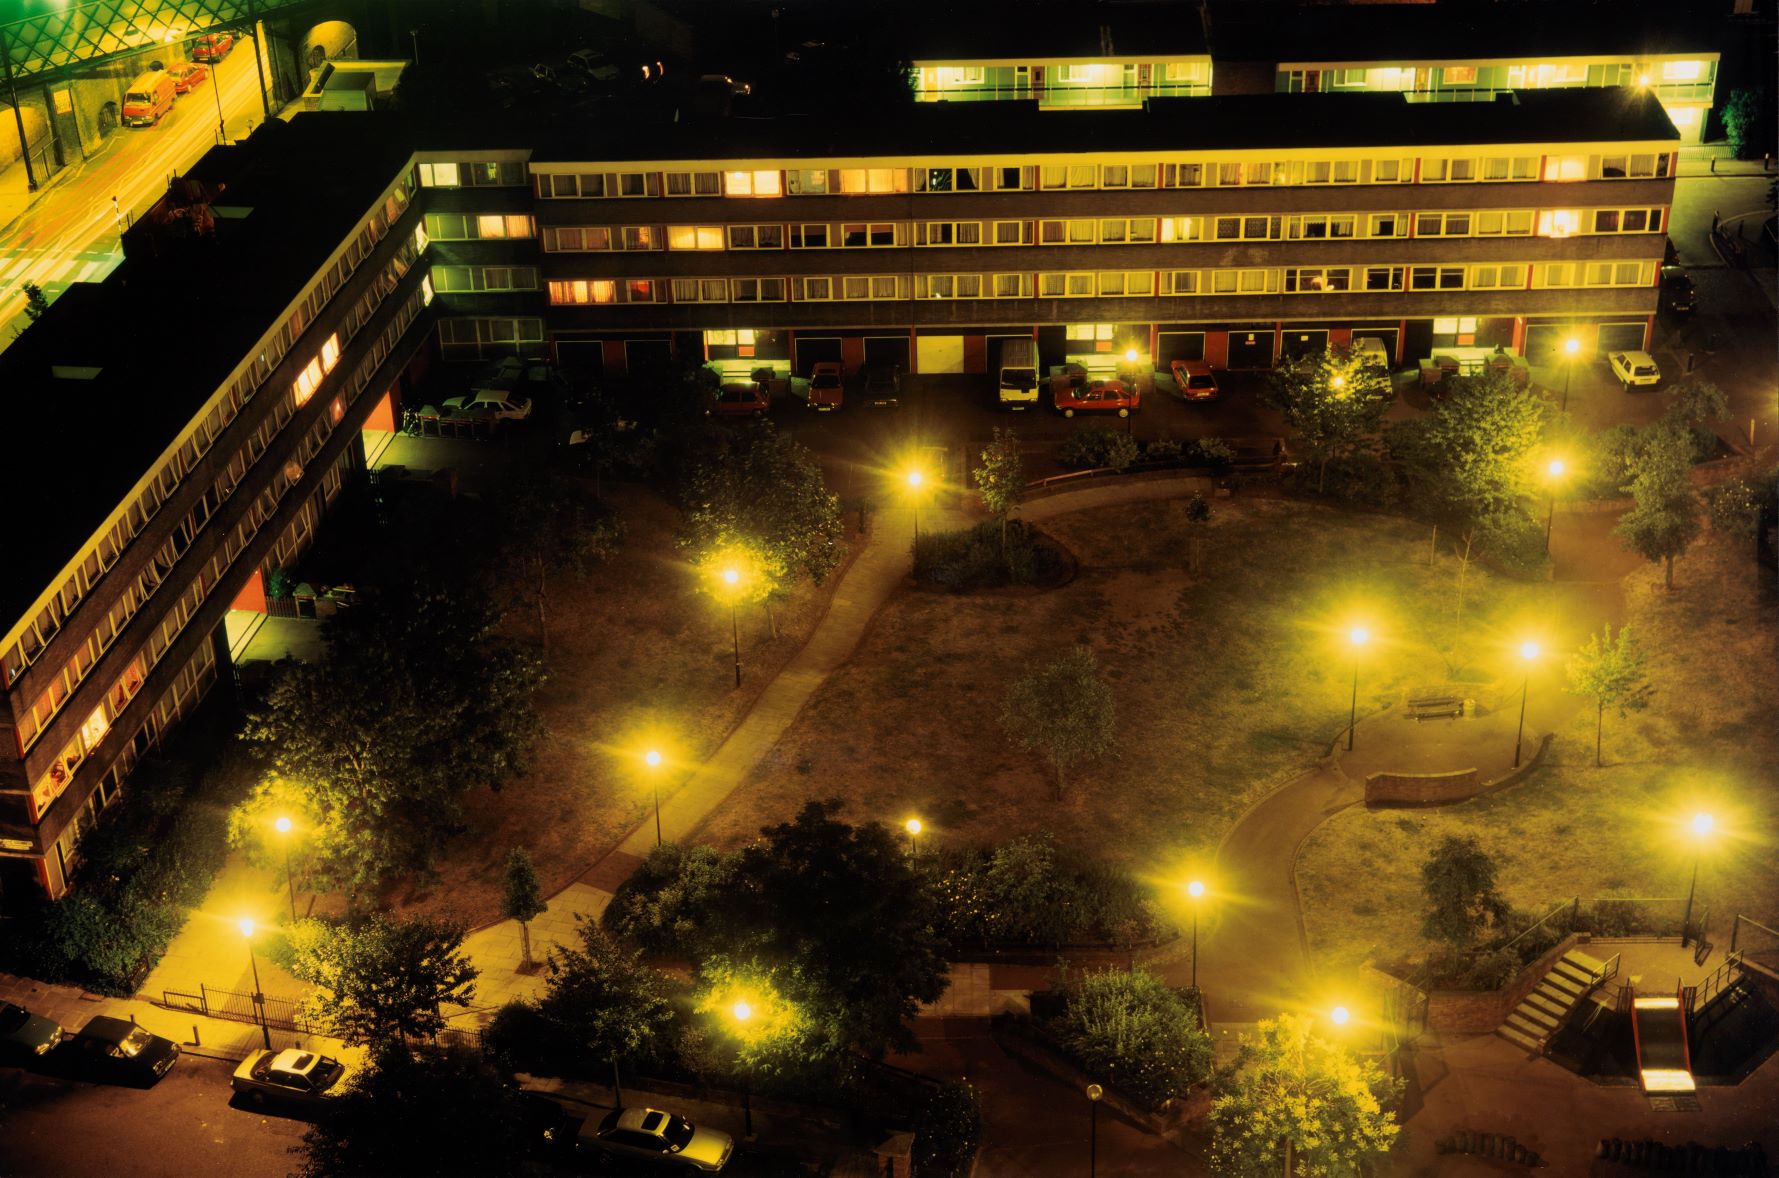 Phootgrphy by artist Rut Blees Luxemburg. Arial view of a block of flats at night. 